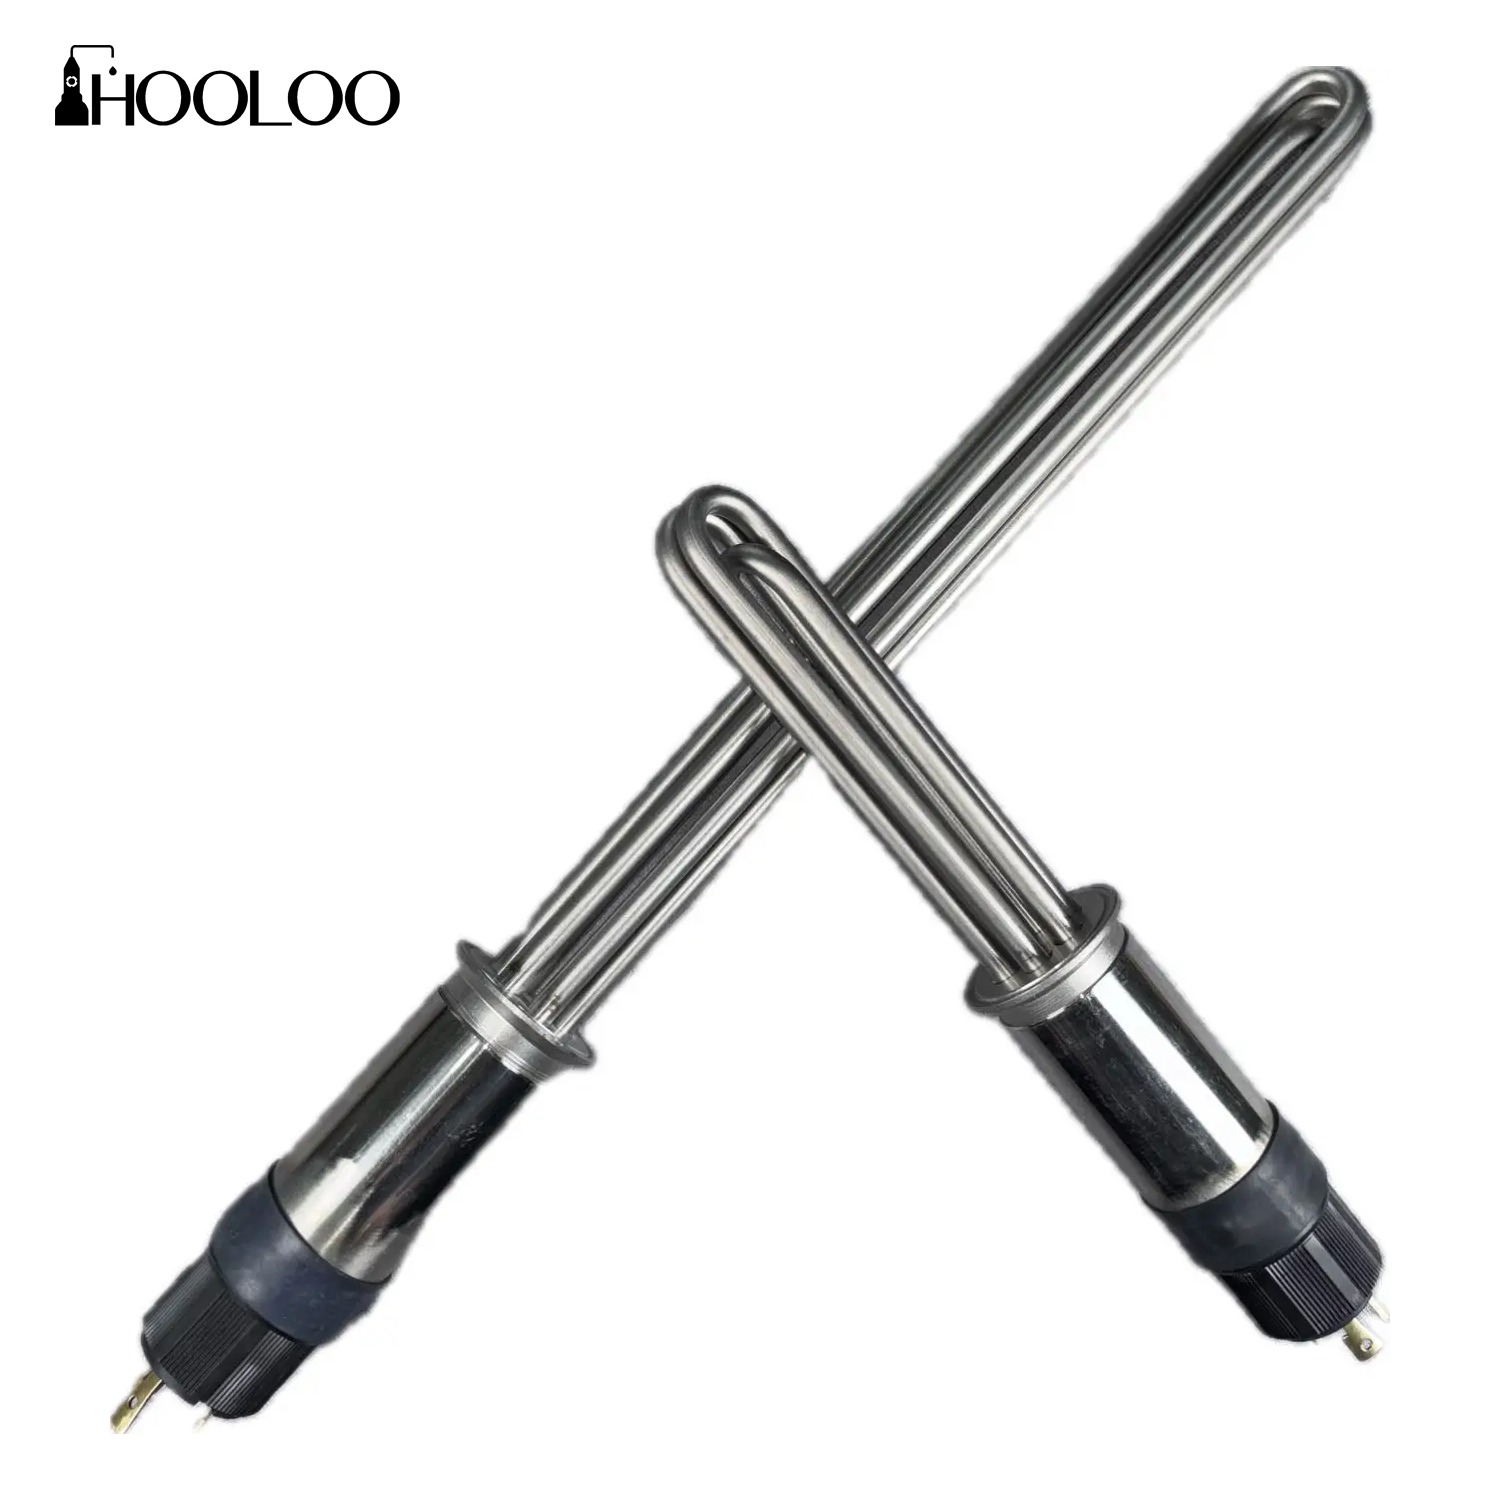 304 Stainless Steel Electric Heating Element, Heater Tube for Home Brewing, Tri-clamp, 220V, 6000W, 2 in, OD 64mm - Hooloo Distilling Equipment Supply